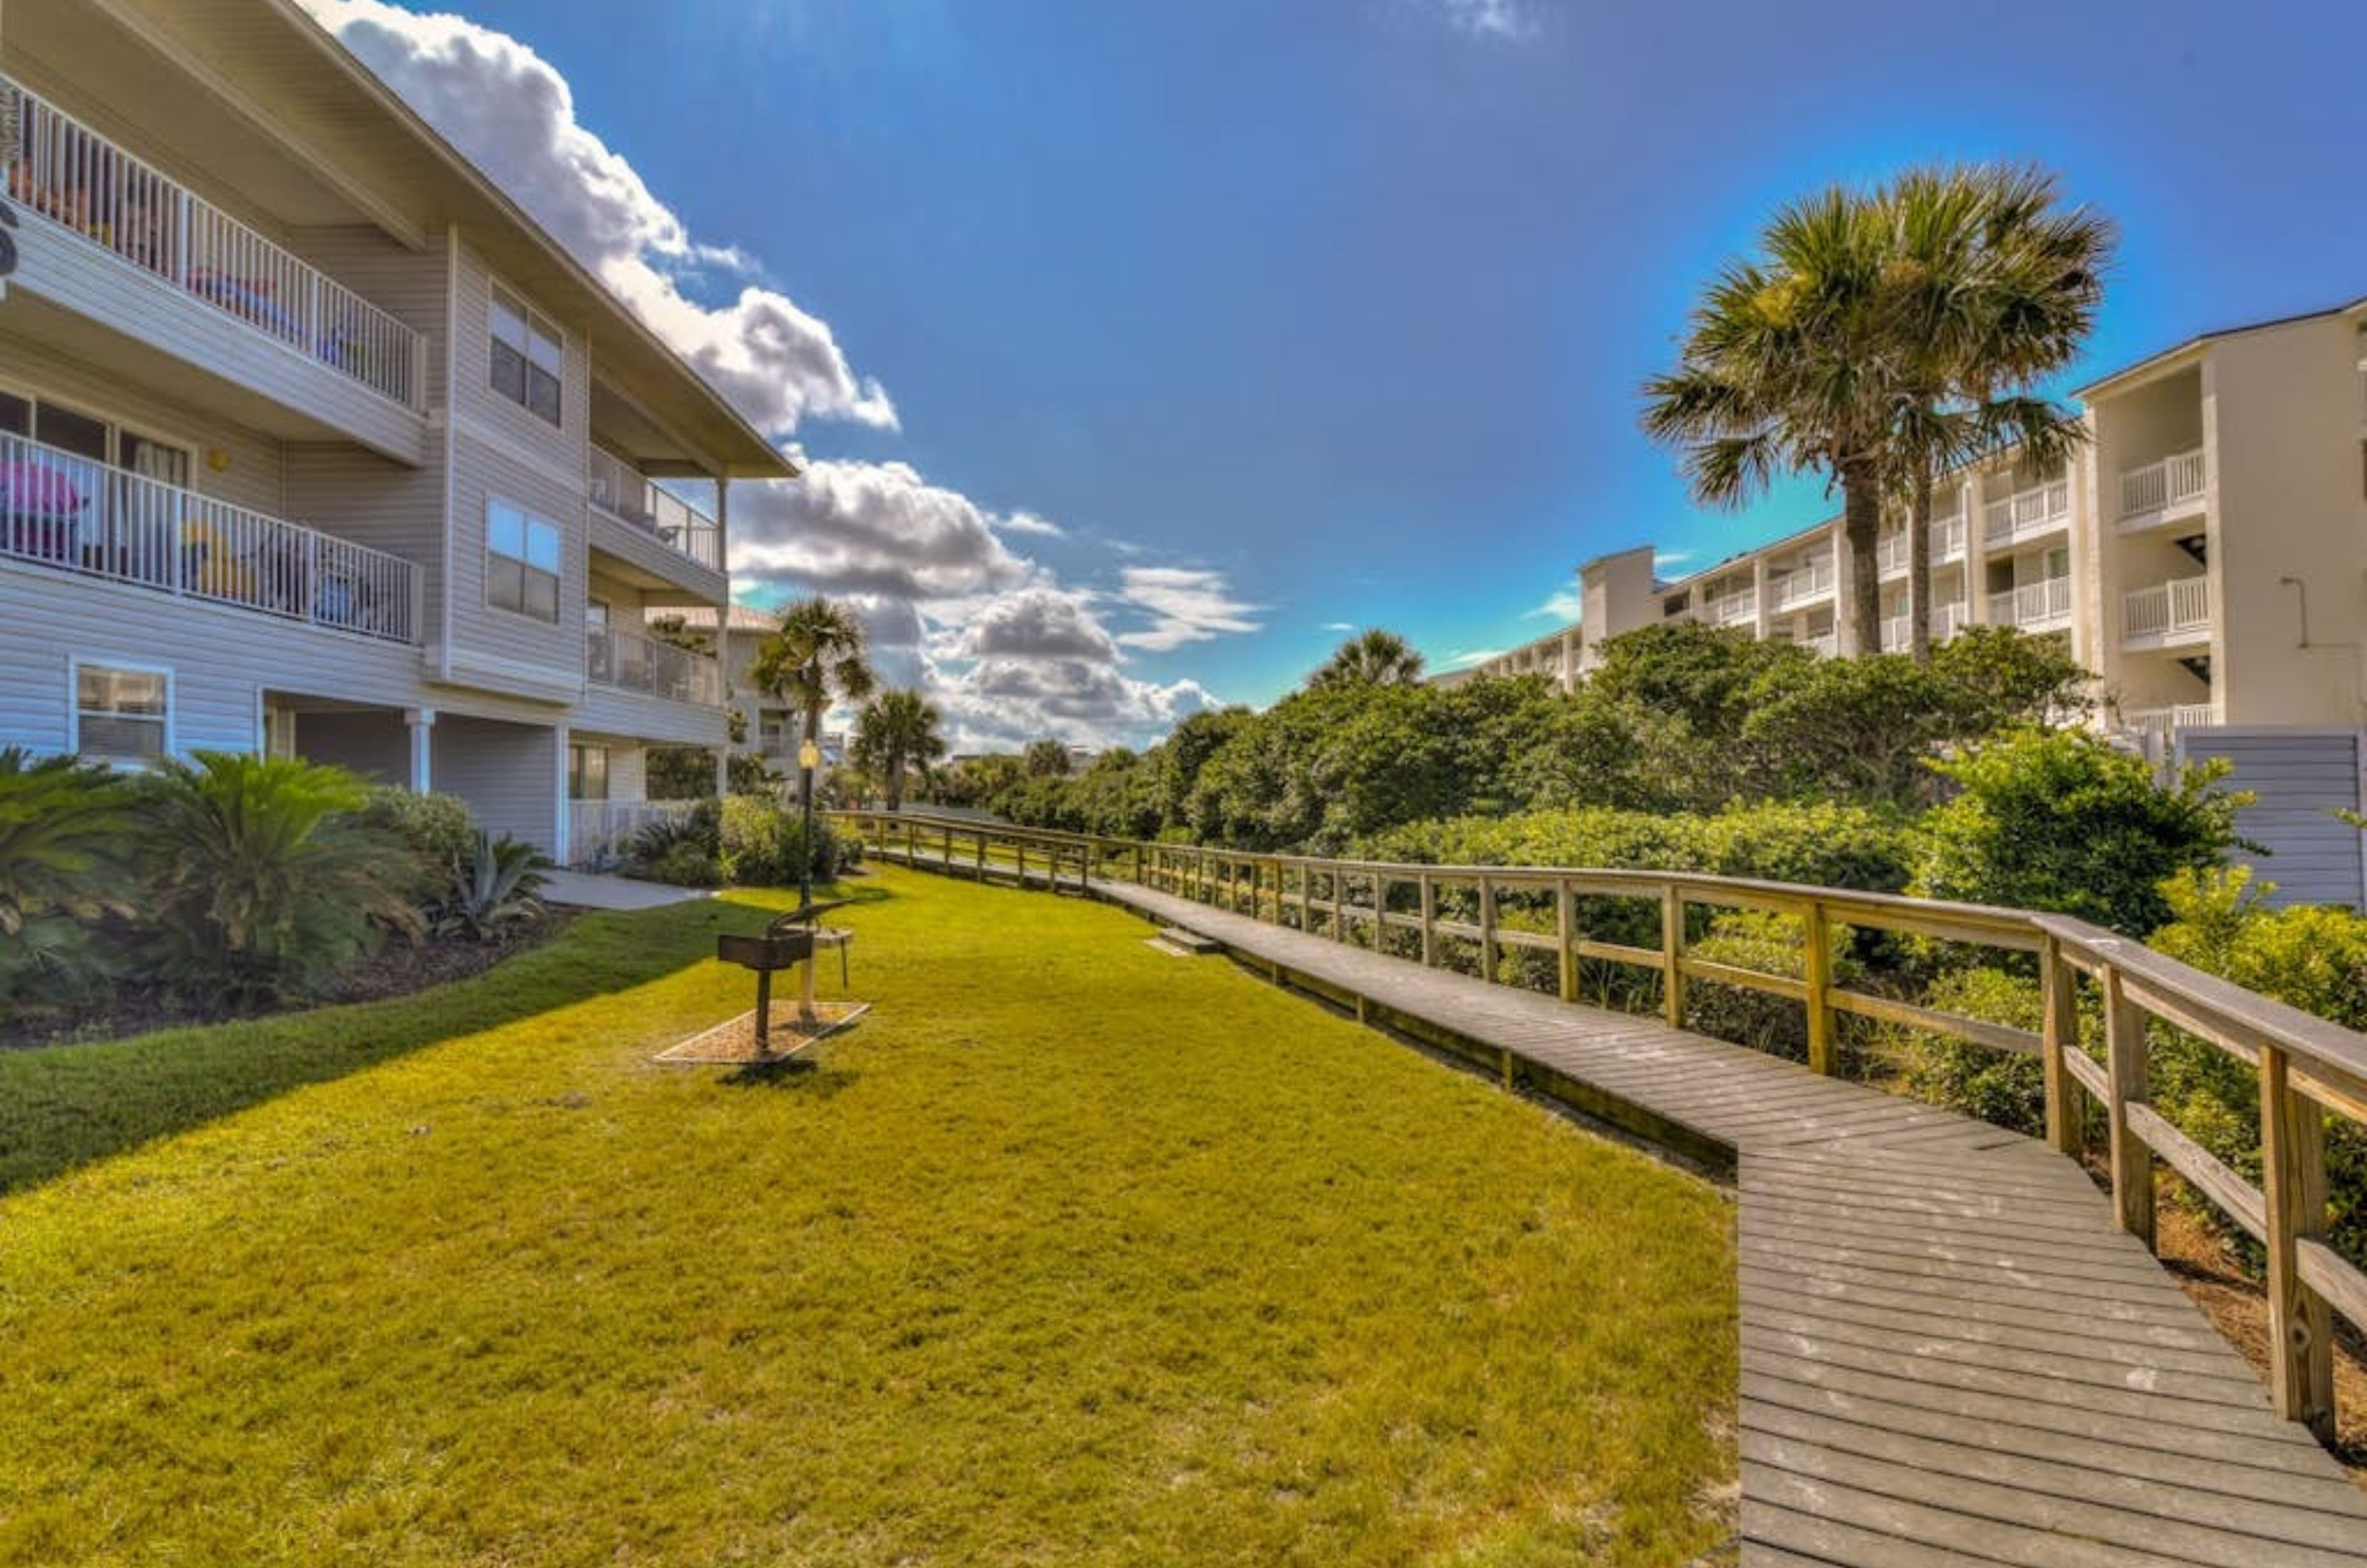 A wooden boardwalk between the townhomes at Beachside Villas in Seagrove Beach Florida	